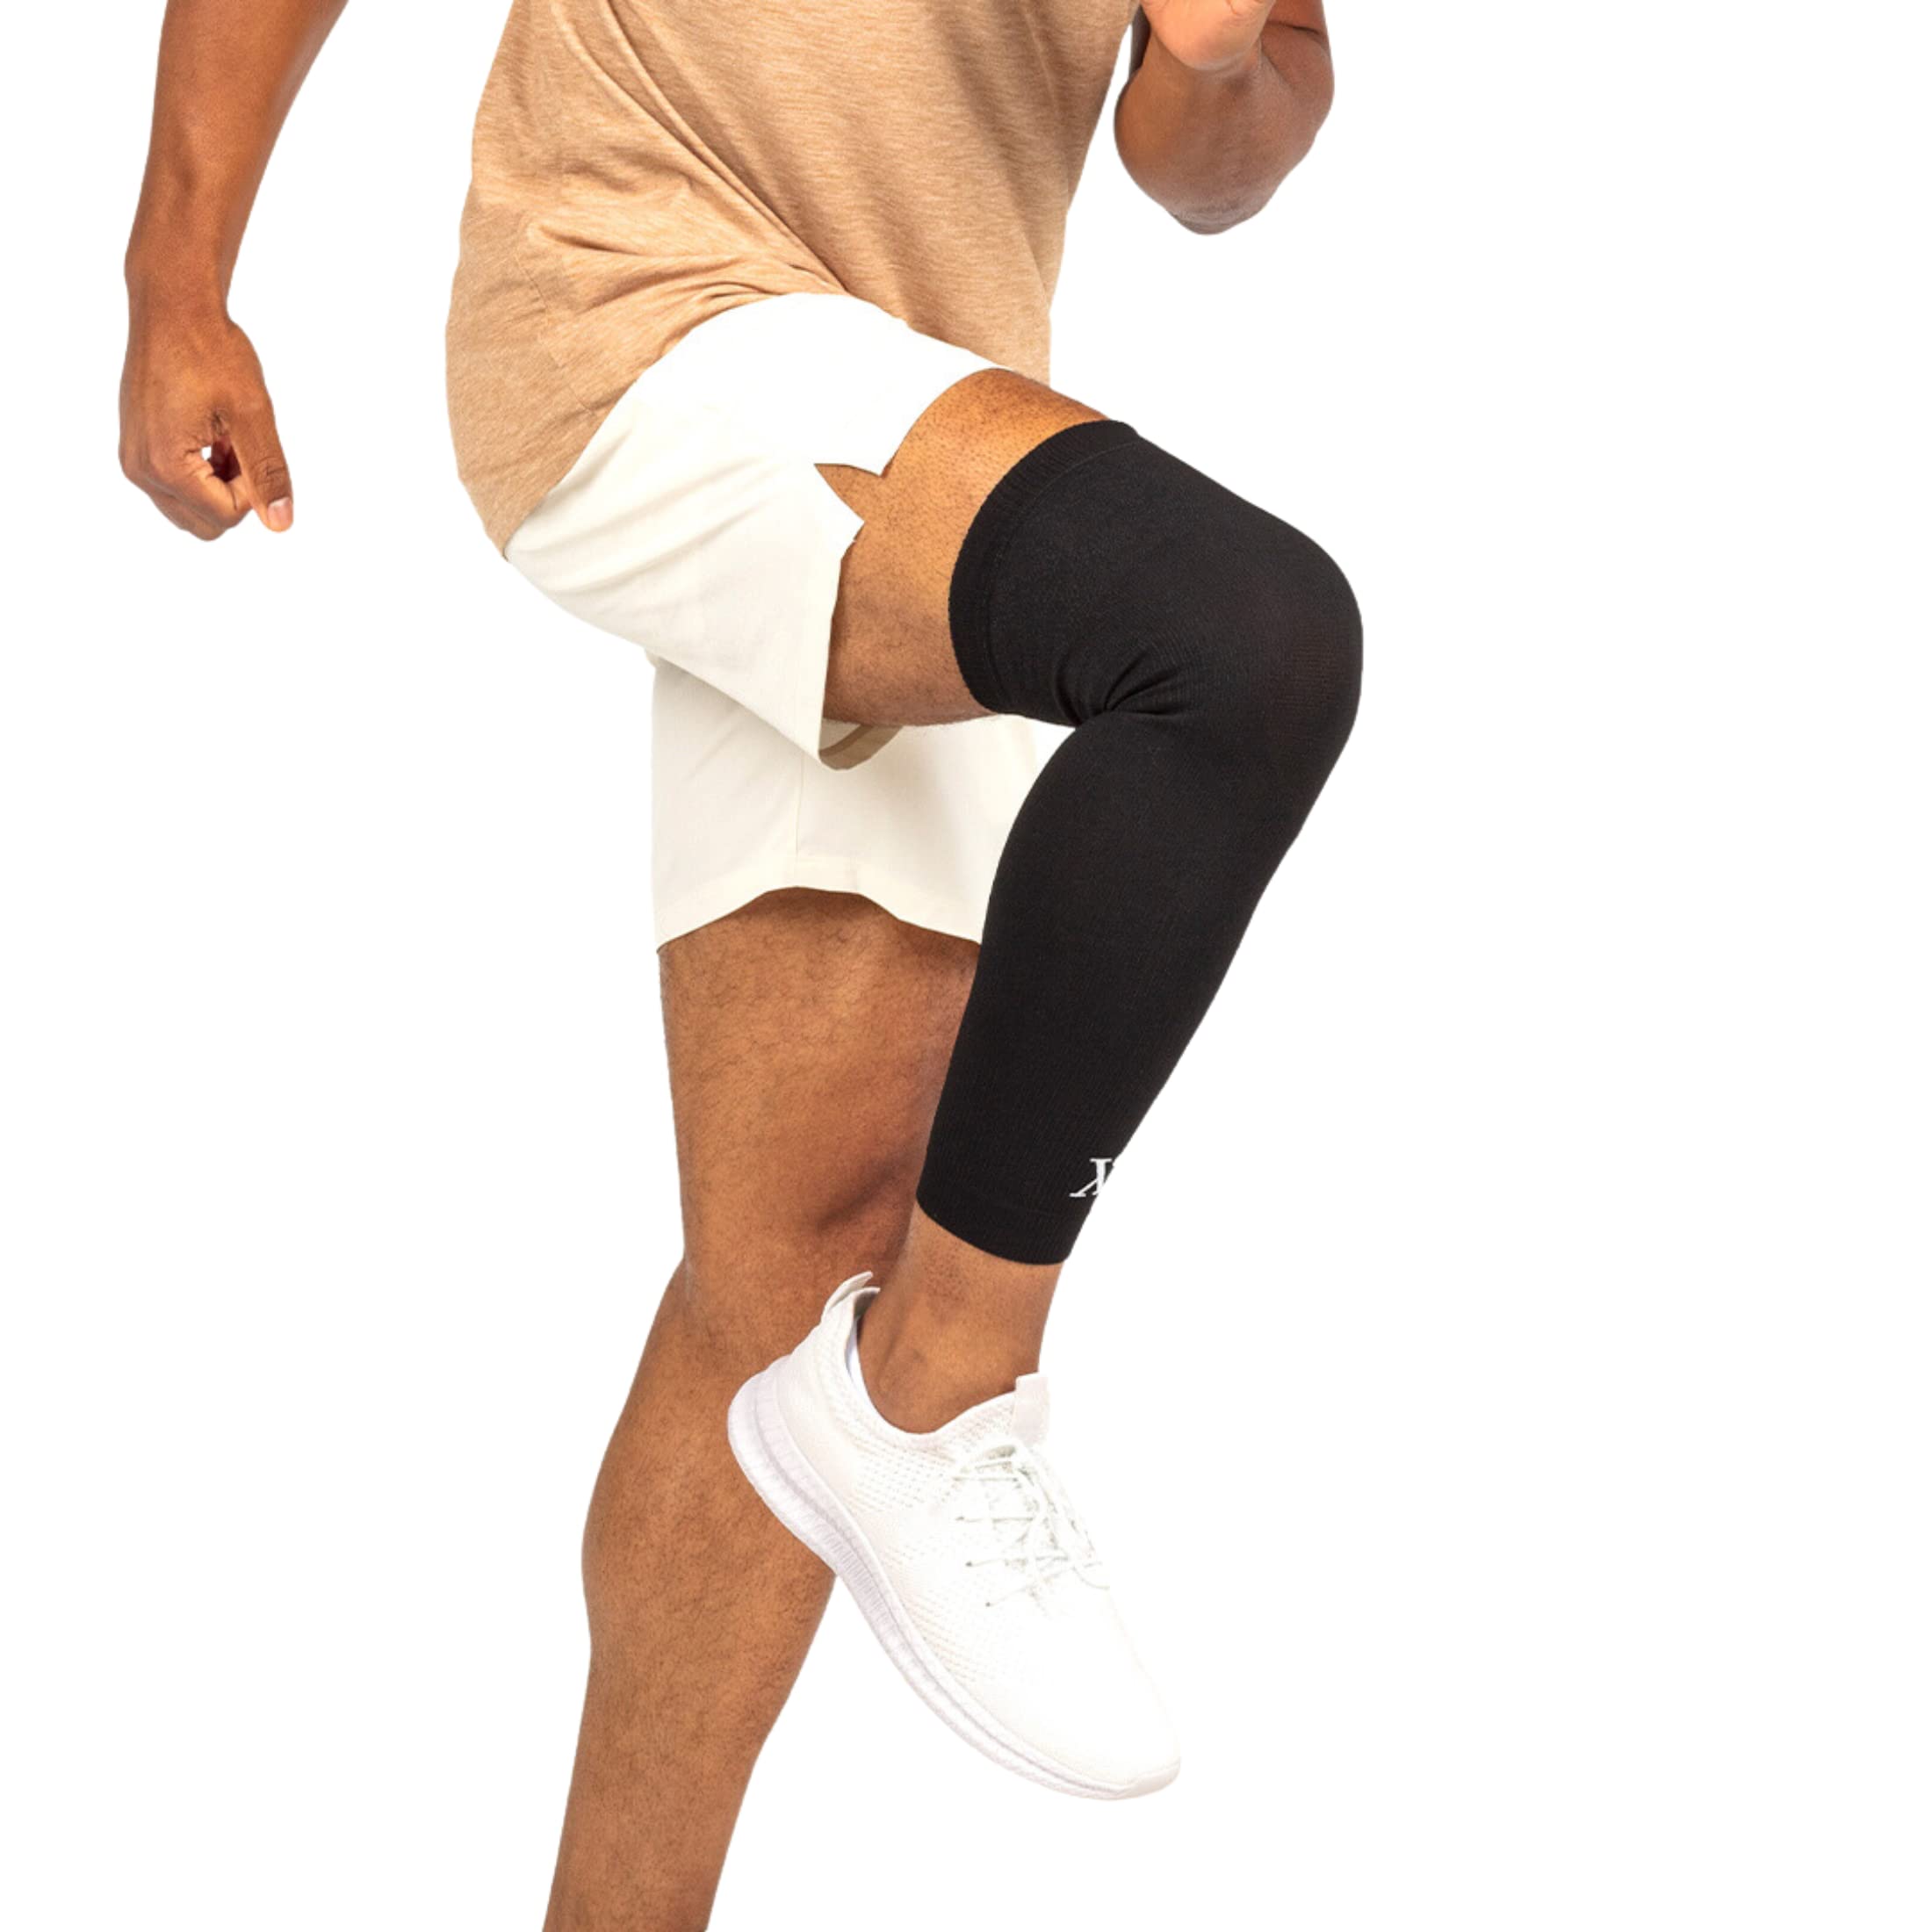 Nufabrx Pain Relieving Arm Compression Sleeve